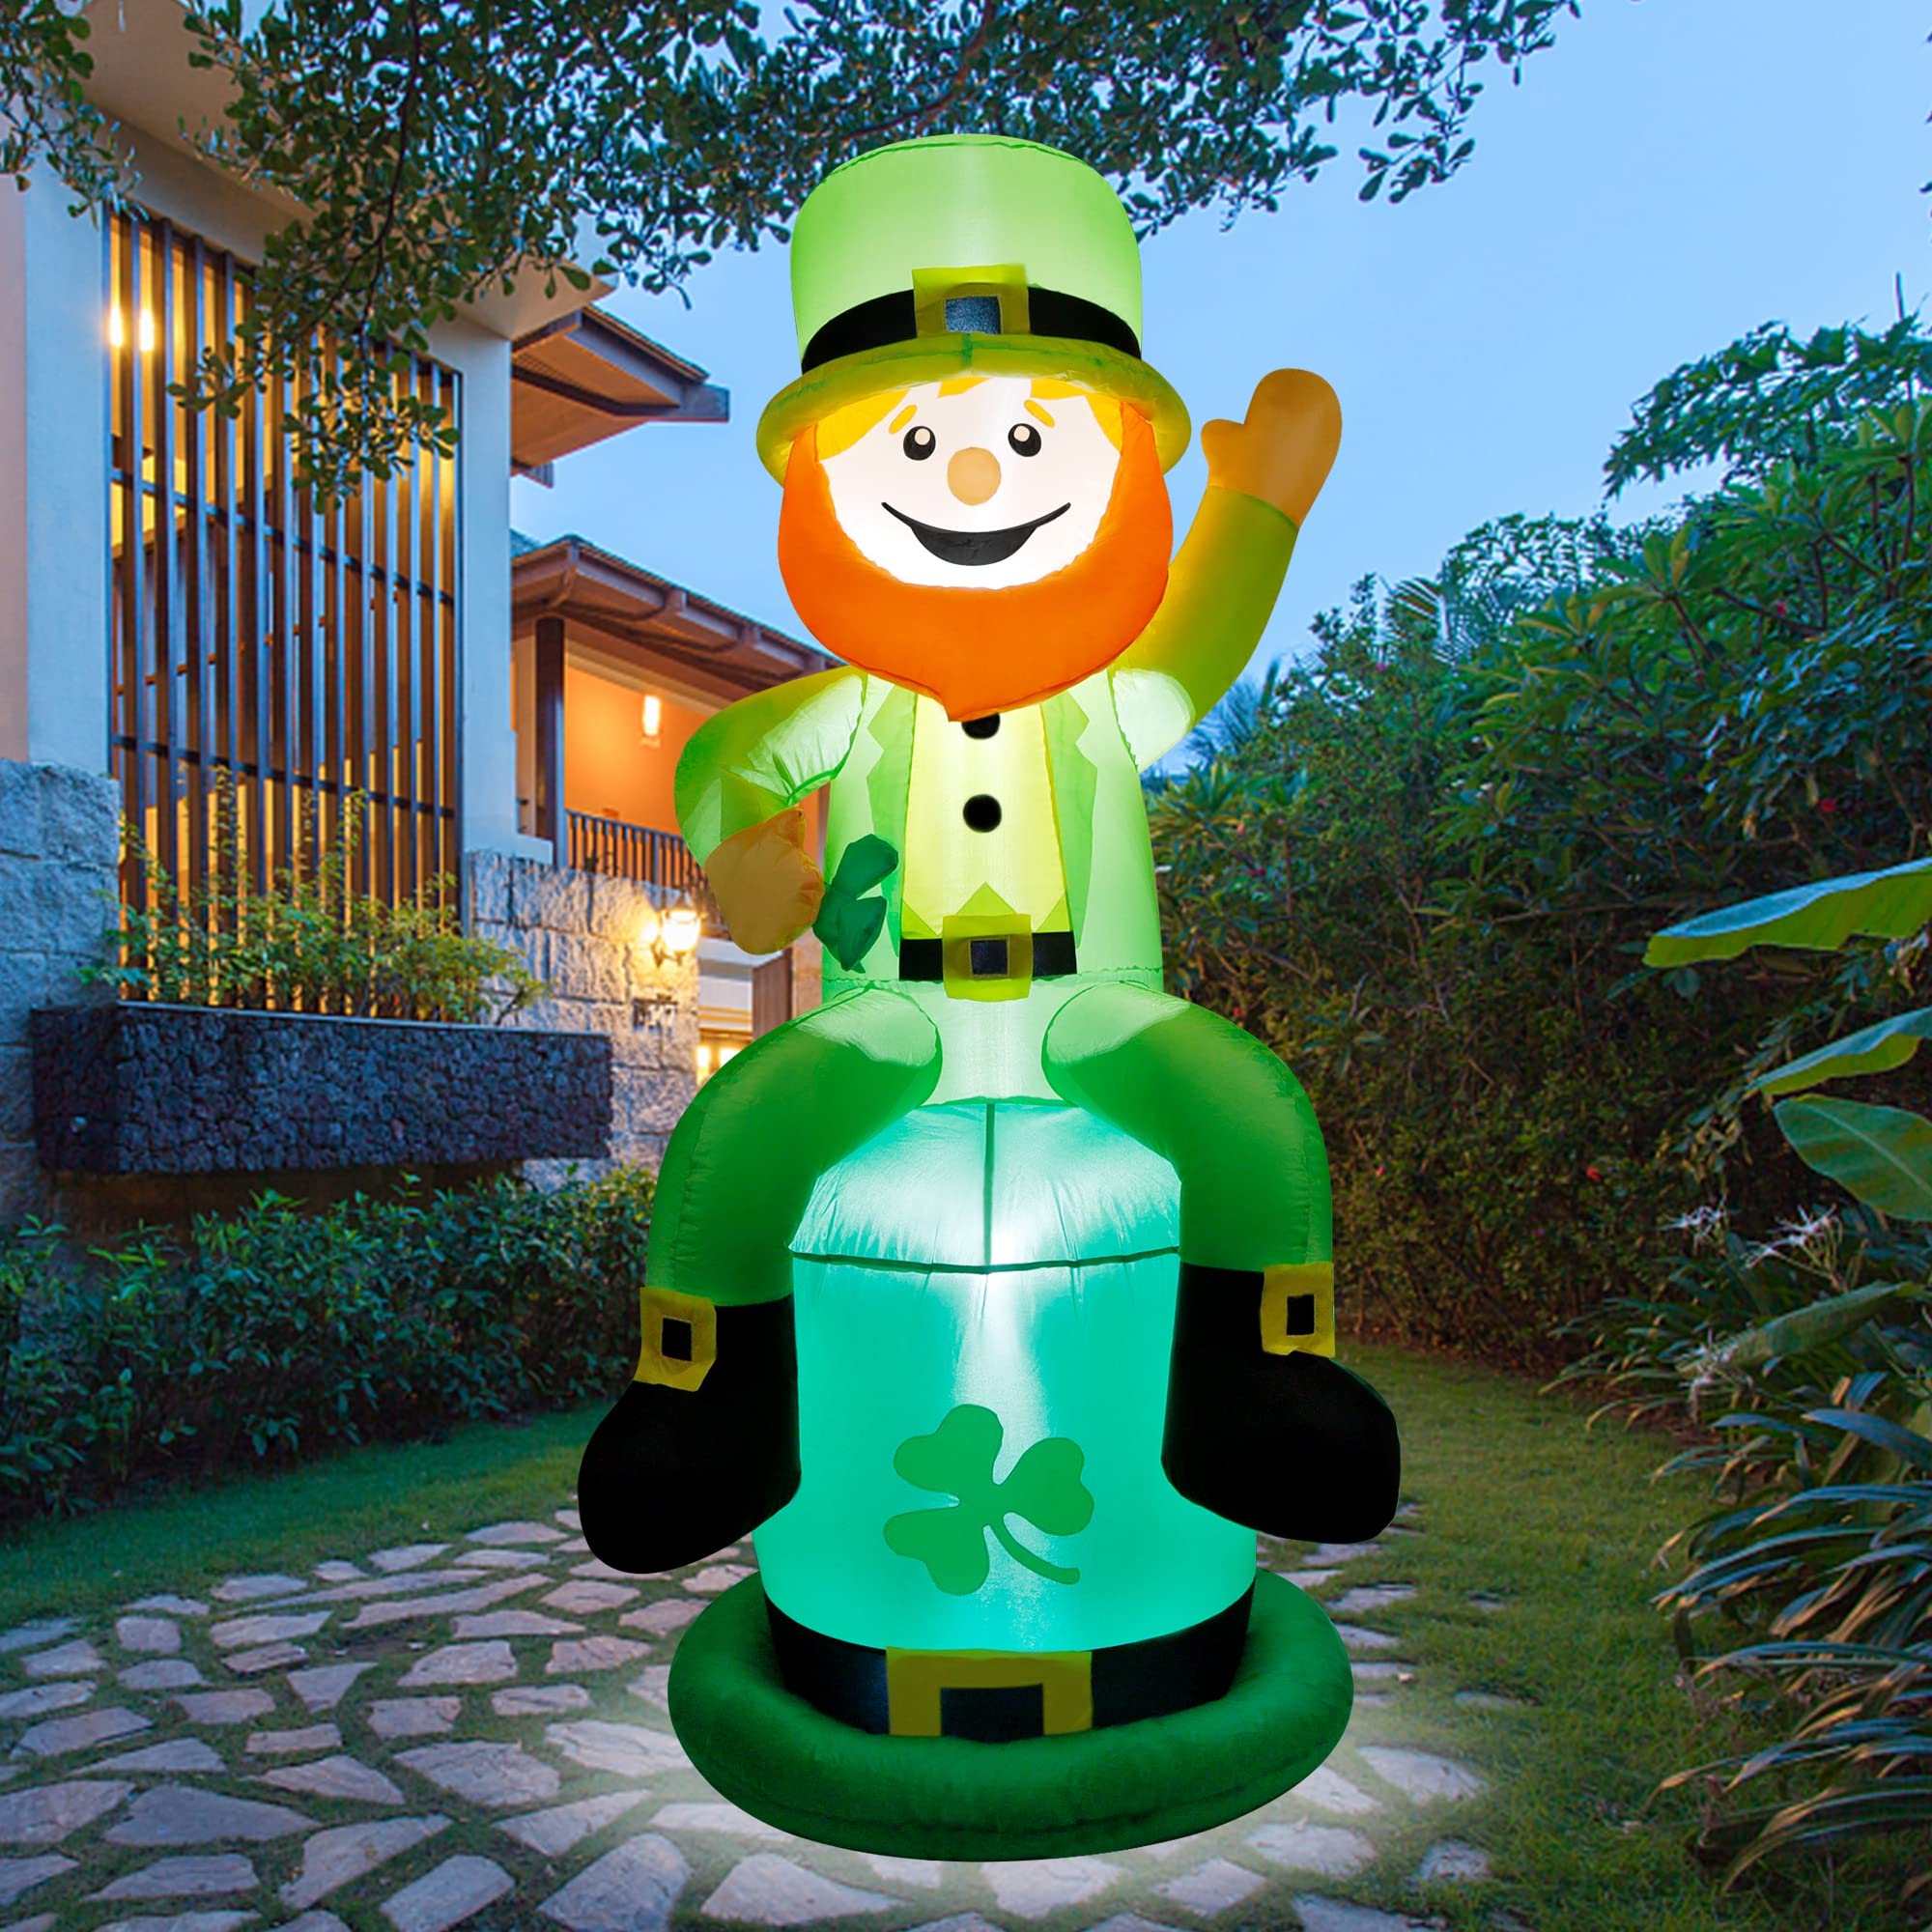 yofit 5 FT St. Patrick's Day Inflatable Leprechaun, Blow up Leprechaun Shamrock Outdoor Decoration with LED Lights, Perfect for Yard Garden Lawn Front Door Holiday Decor